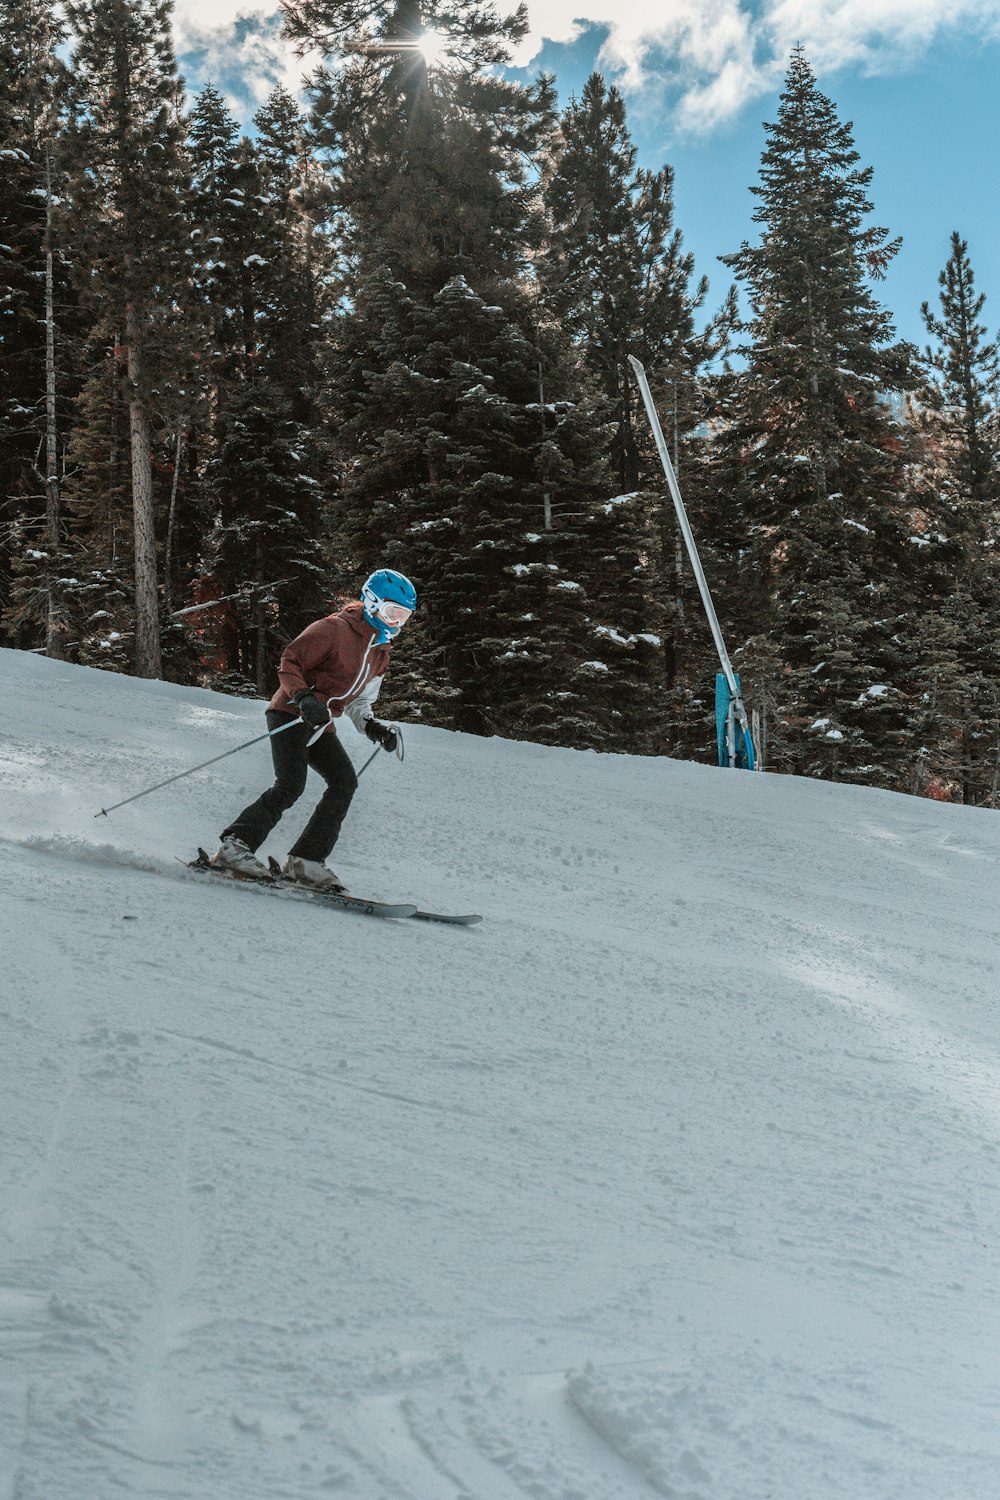 person in red jacket and blue pants riding ski blades on snow covered ground during daytime